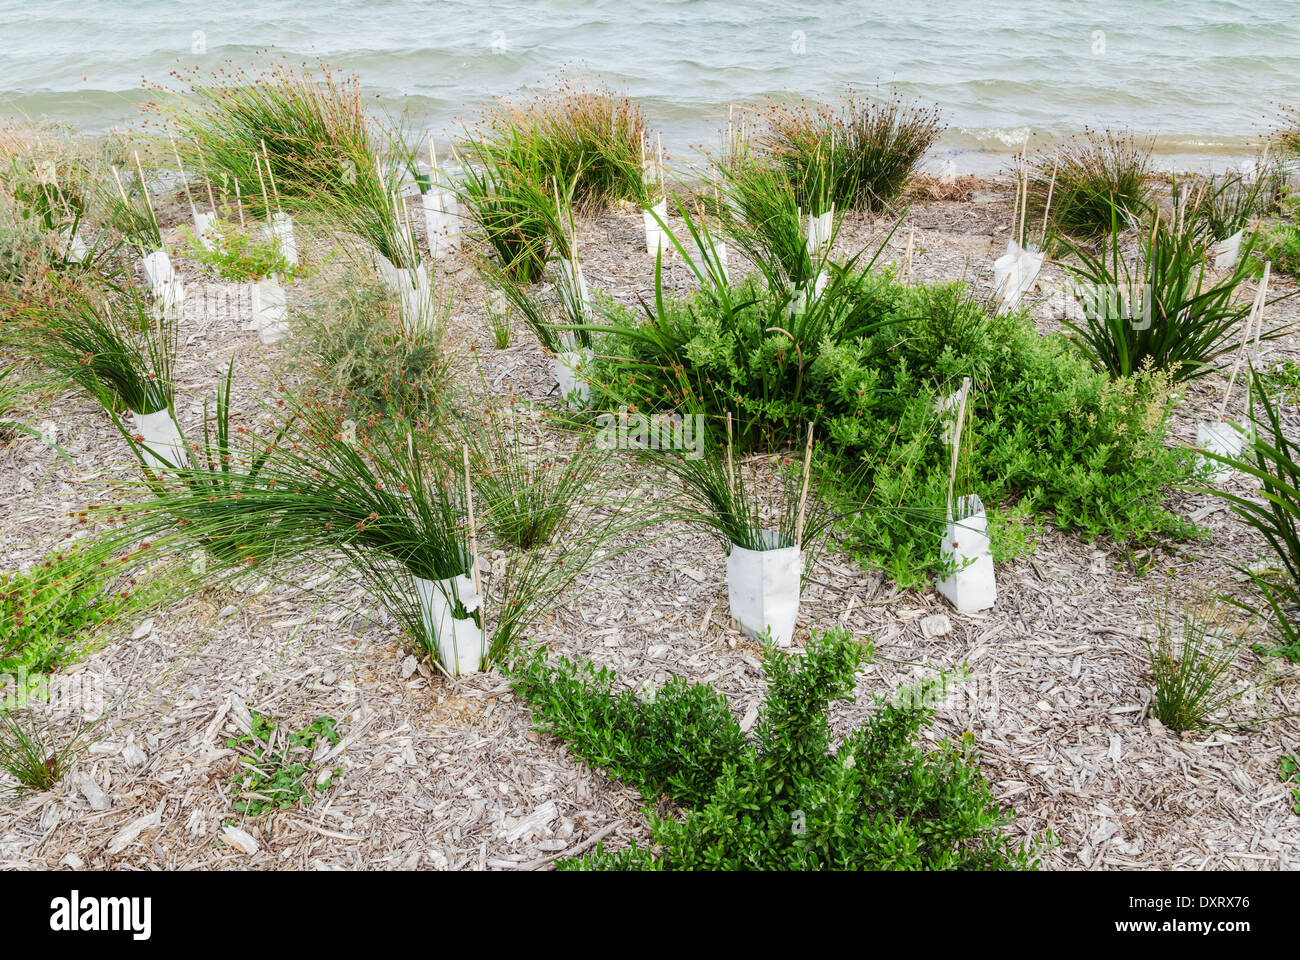 River mouth environment conservation through re-vegetation in Western Australia Stock Photo